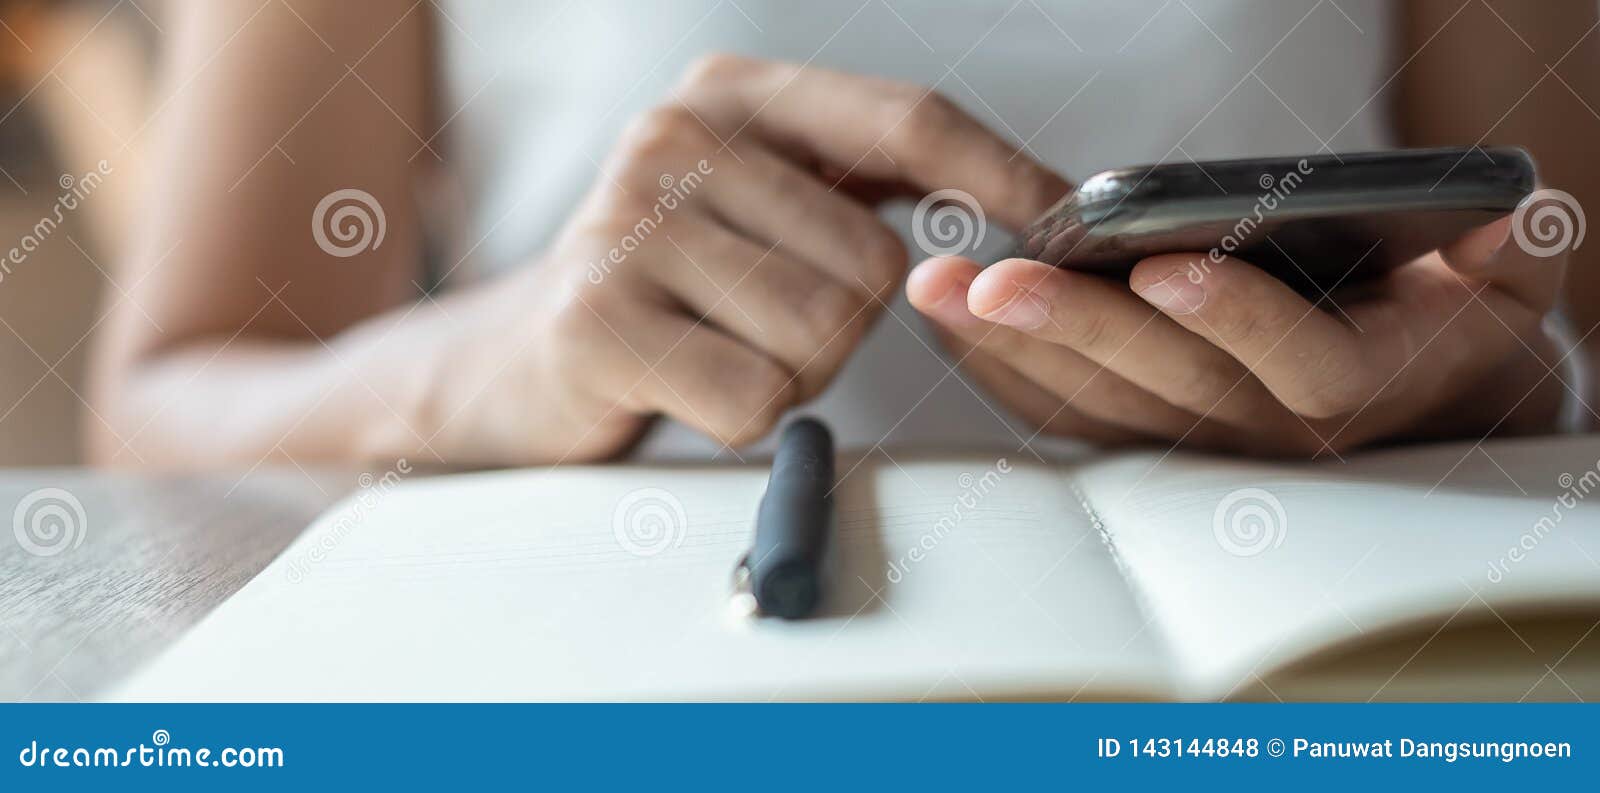 young asian businesswoman using mobile phone in office, woman sitting and hand touching screen on cellphone. smart business and